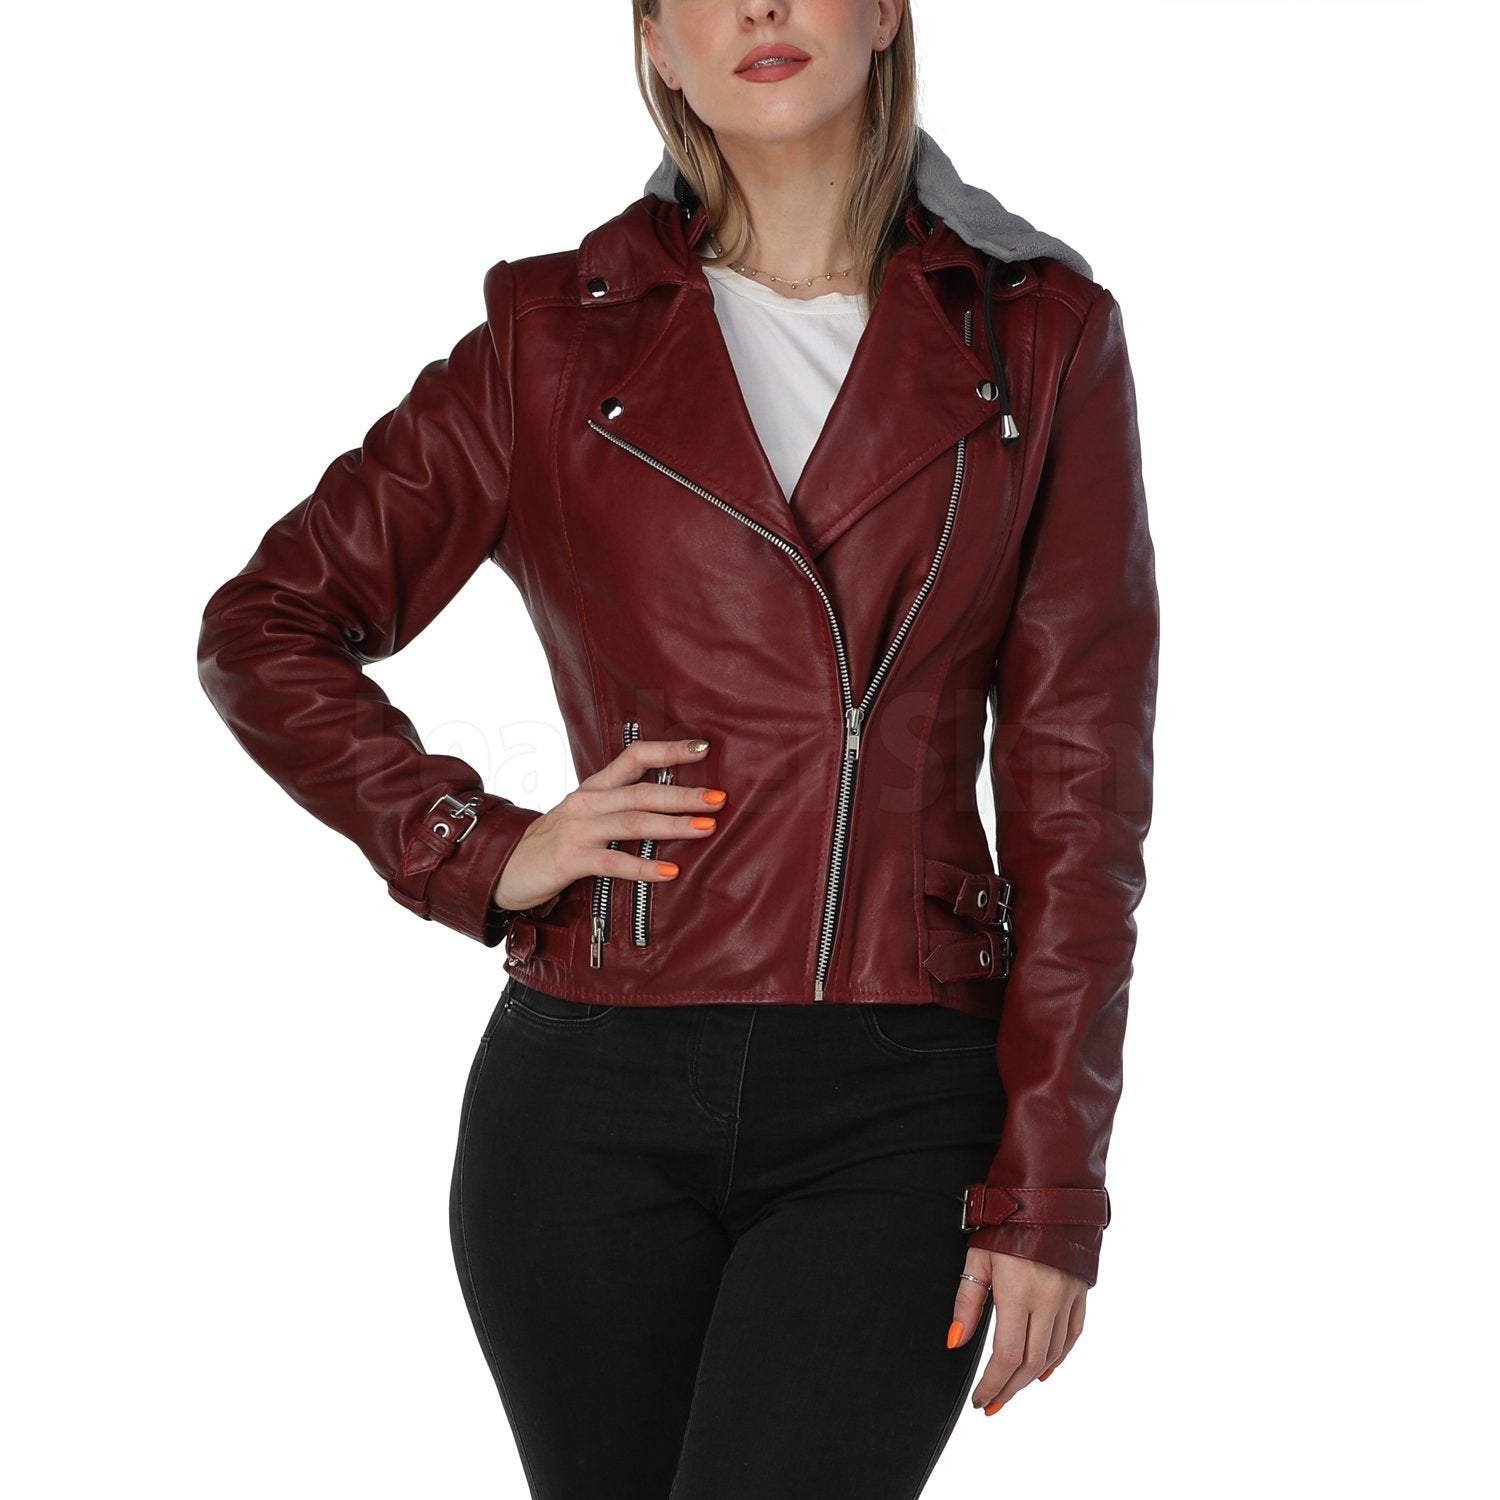 Plus Size Leather Jackets - Leather 